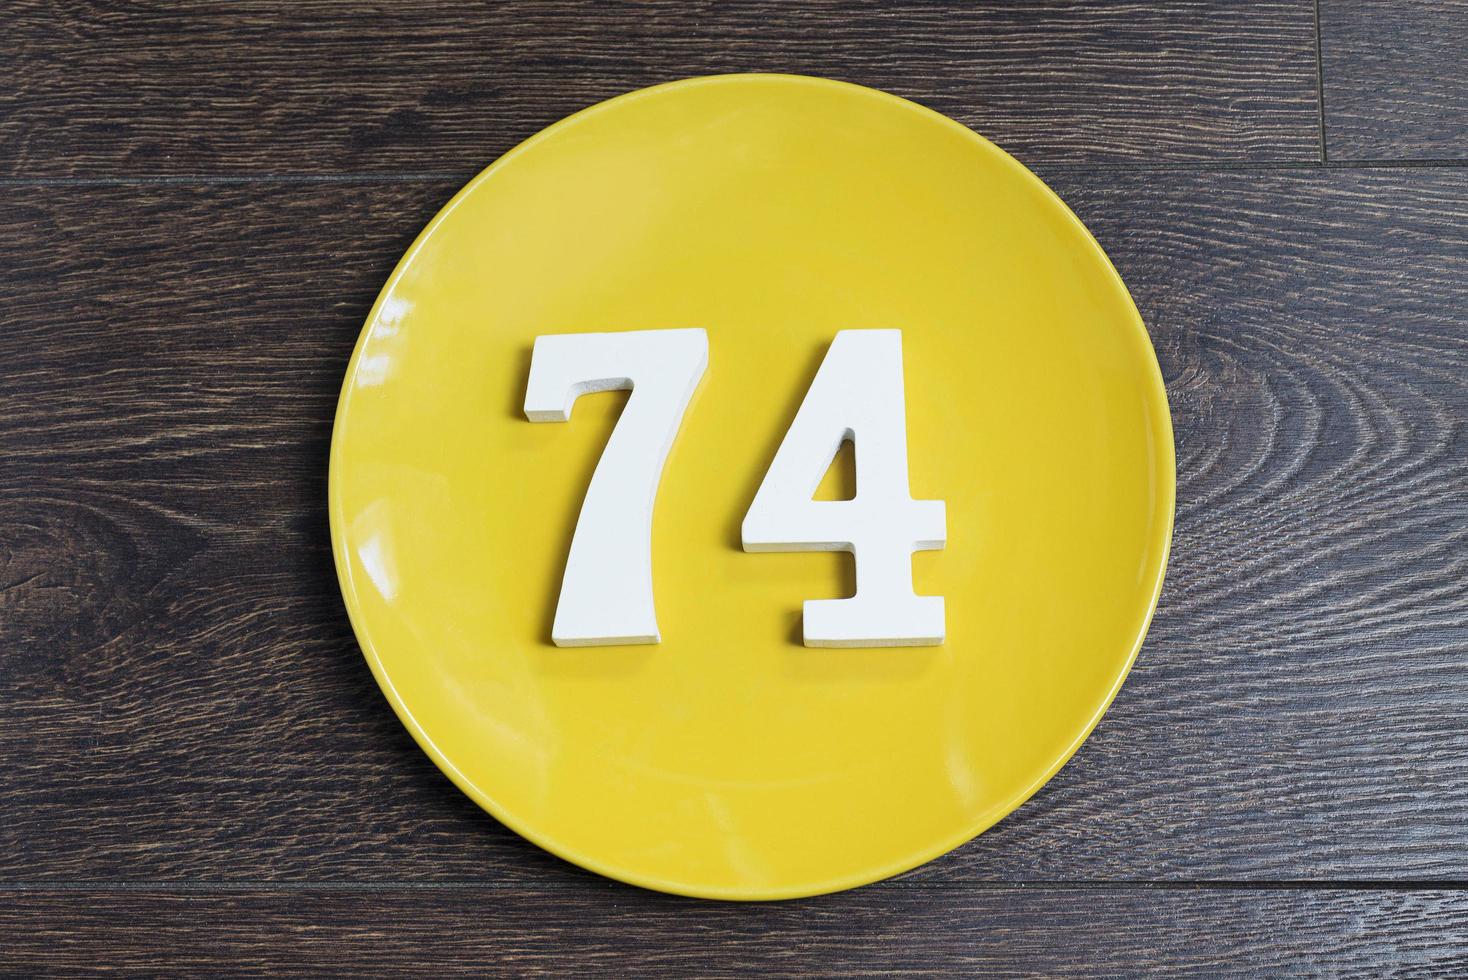 The number seventy-four on the yellow plate. photo